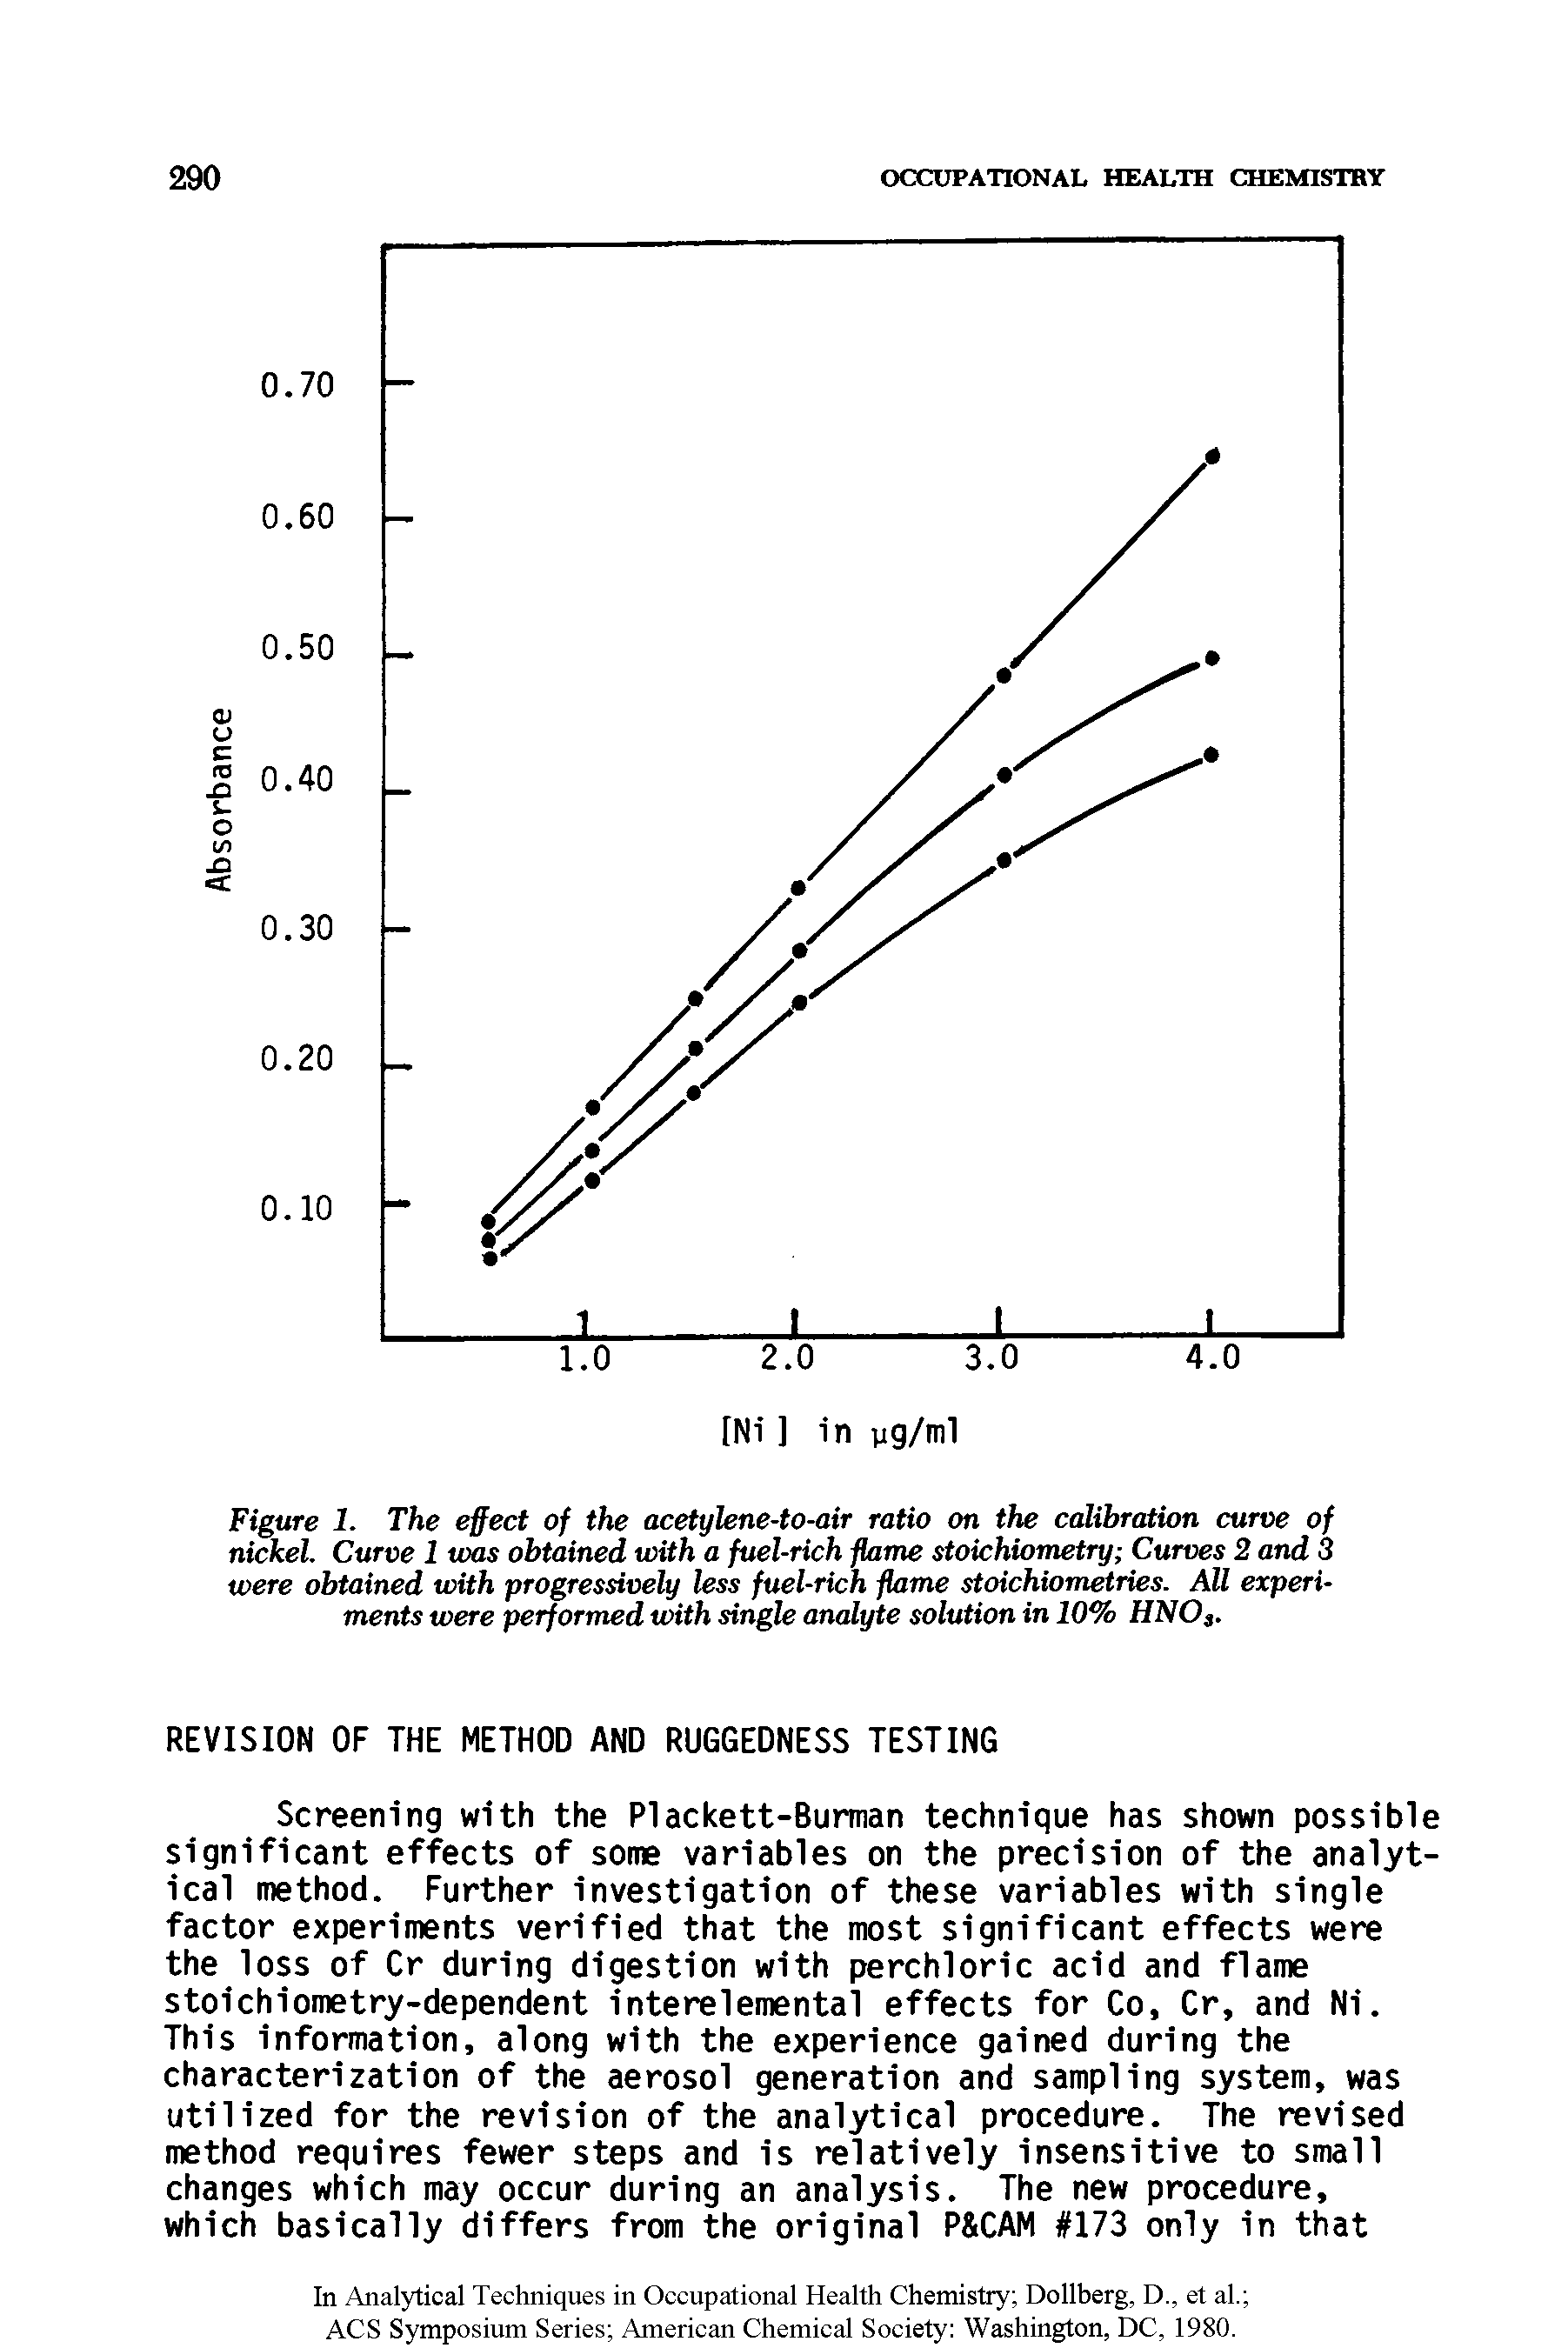 Figure 1. The effect of the acetylene-to-air ratio on the calibration curve of nickel. Curve 1 was obtained with a fuel-rich fame stoichiometry Curves 2 and 3 were obtained with progressively less fuel-rich flame stoichiometries. All experiments were performed with single analyte solution in 10% HNOa.